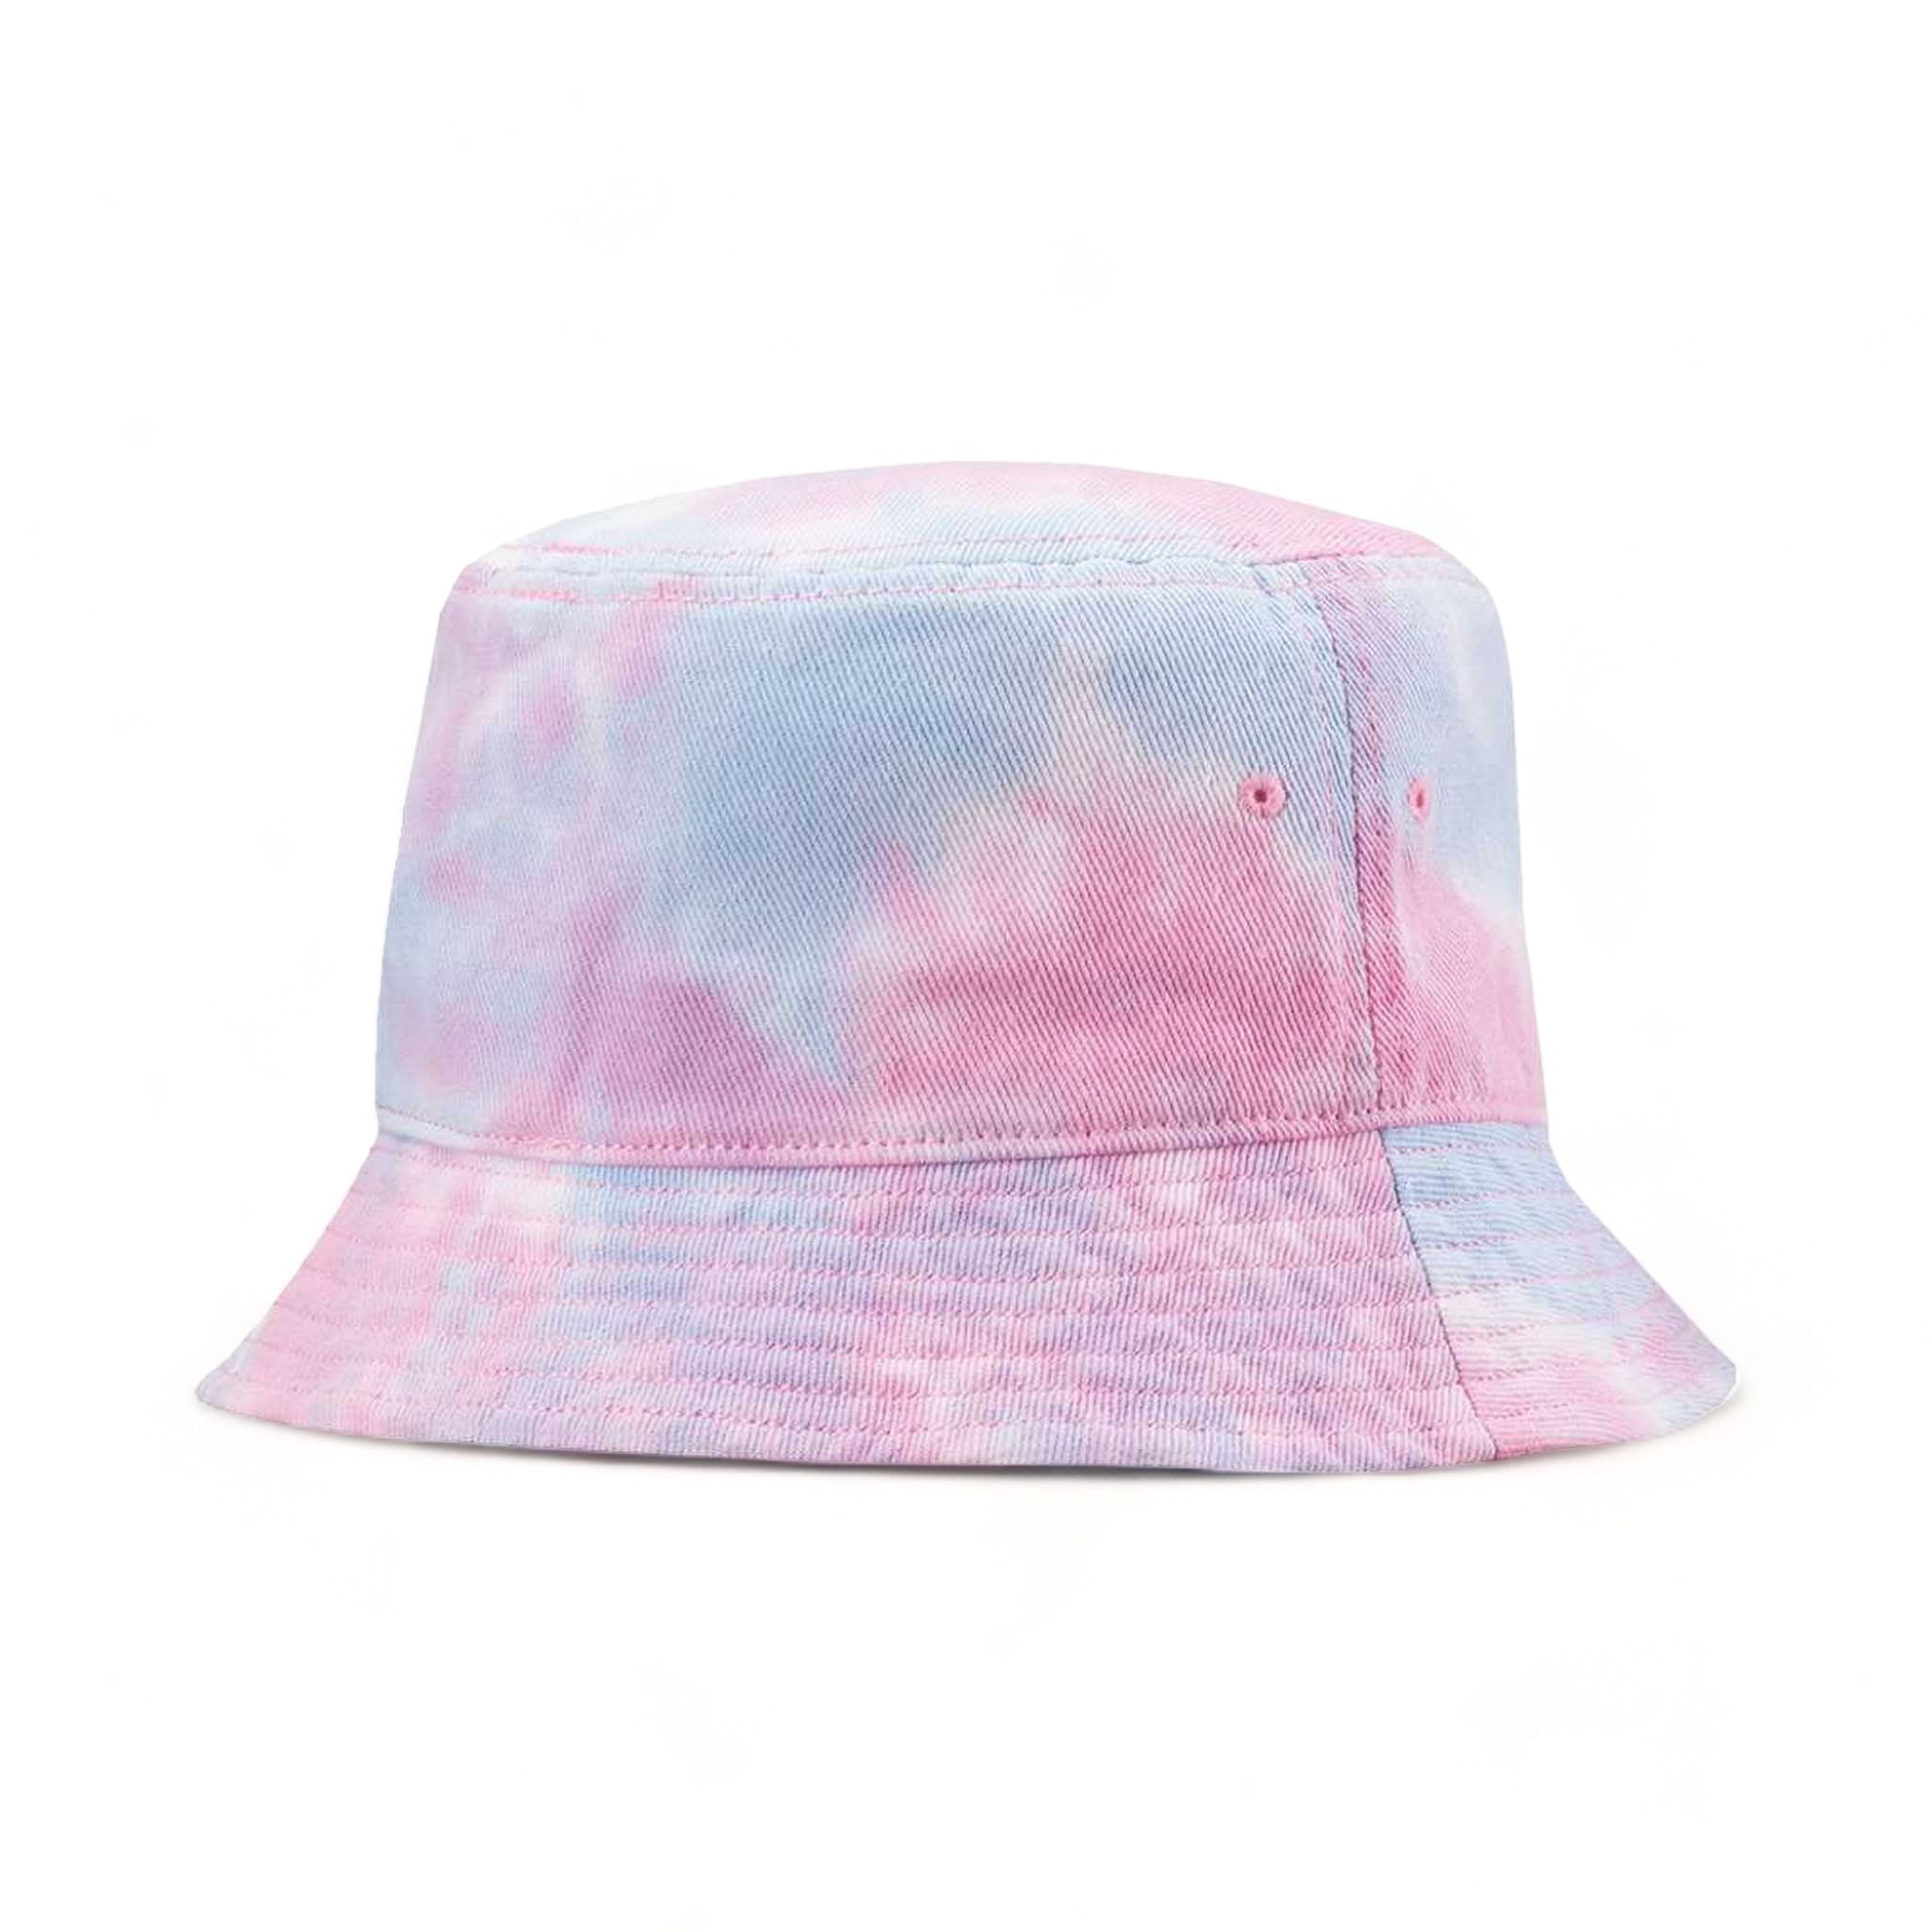 Front view of Sportsman SP450 custom hat in cotton candy